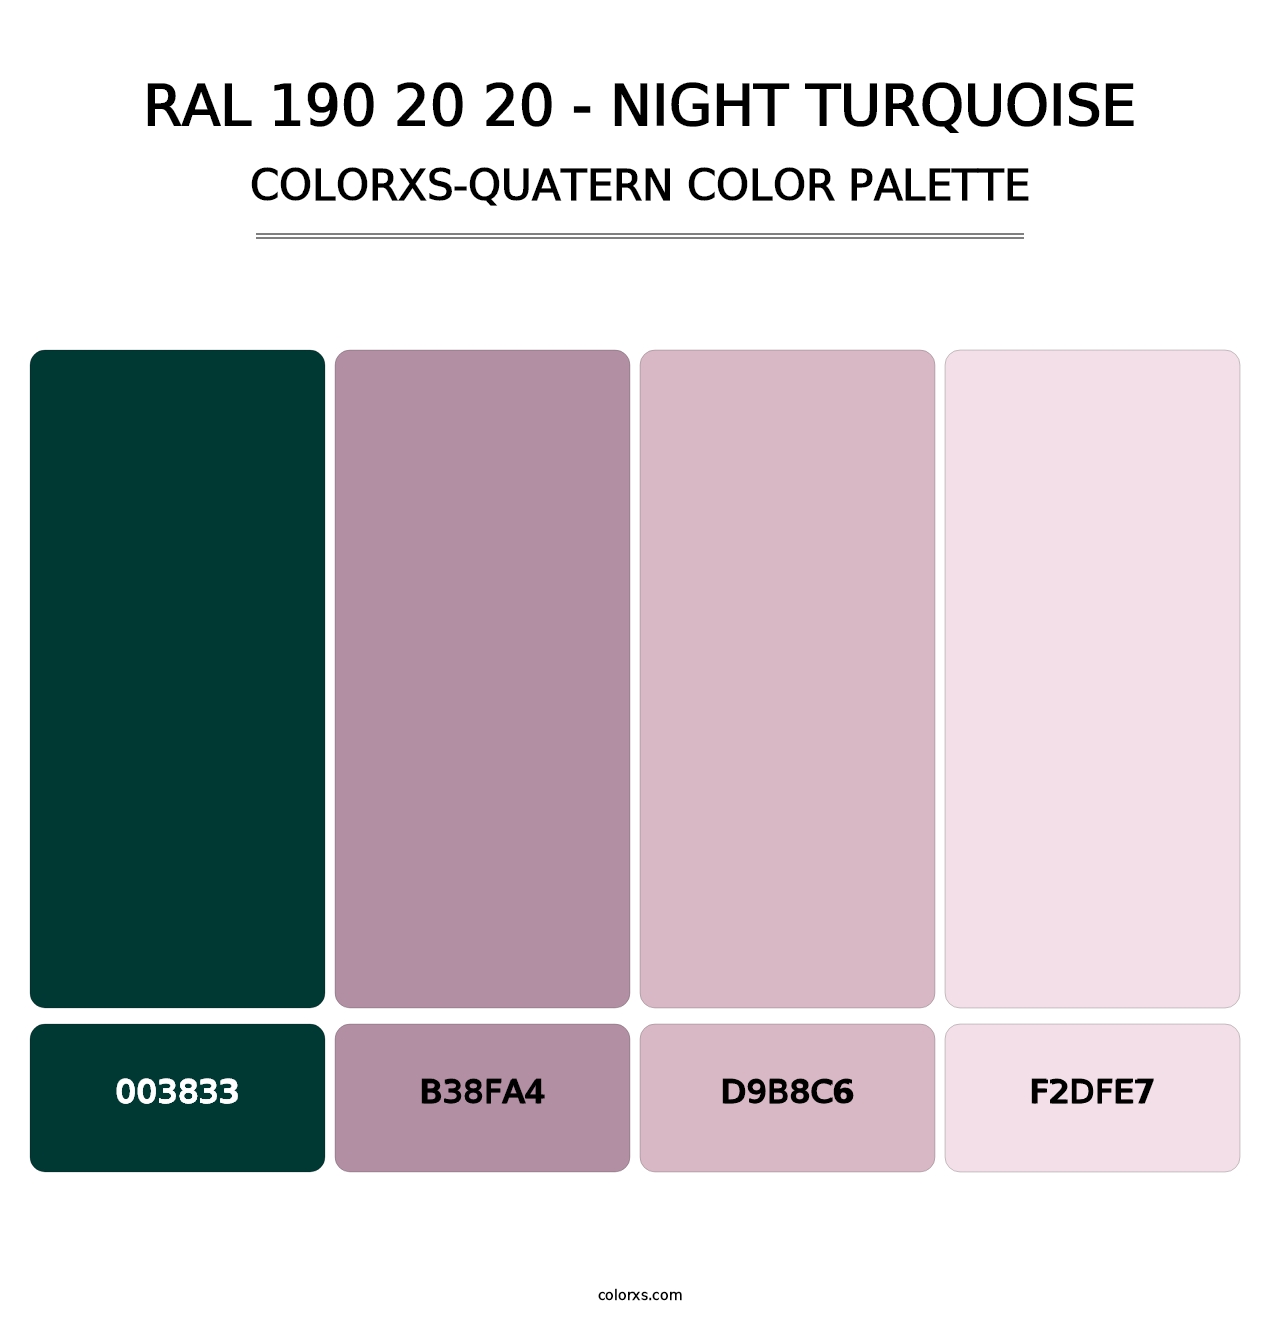 RAL 190 20 20 - Night Turquoise - Colorxs Quatern Palette